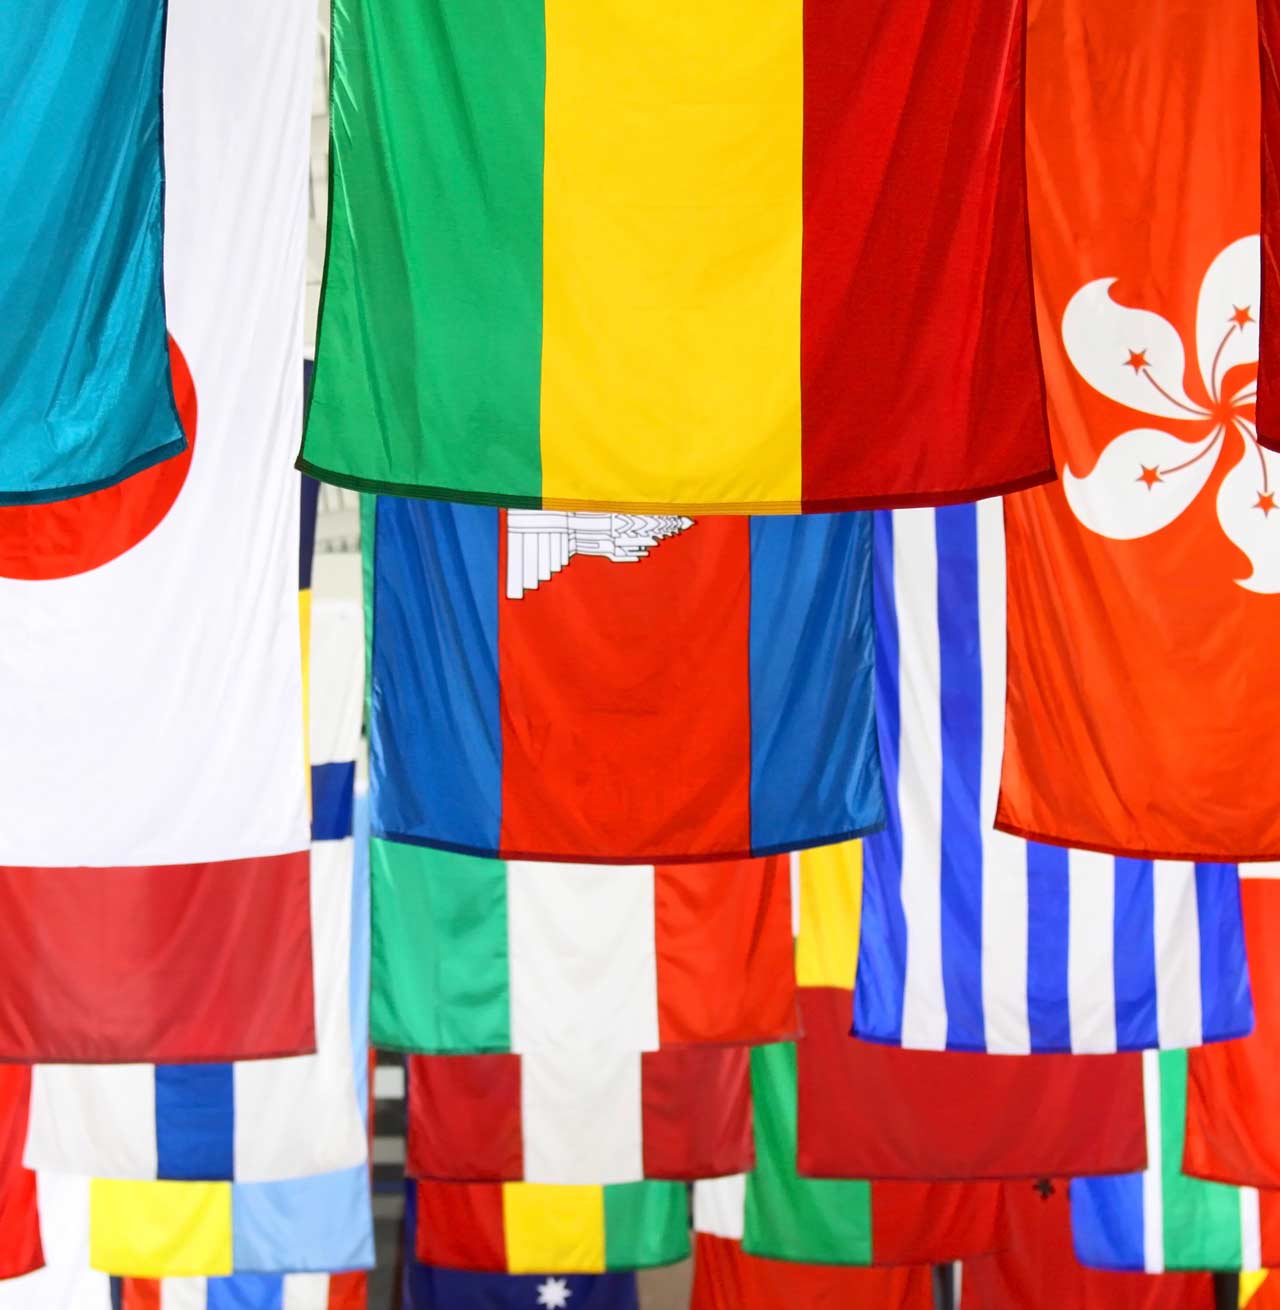 Flags representing different countries hanging from their short edge